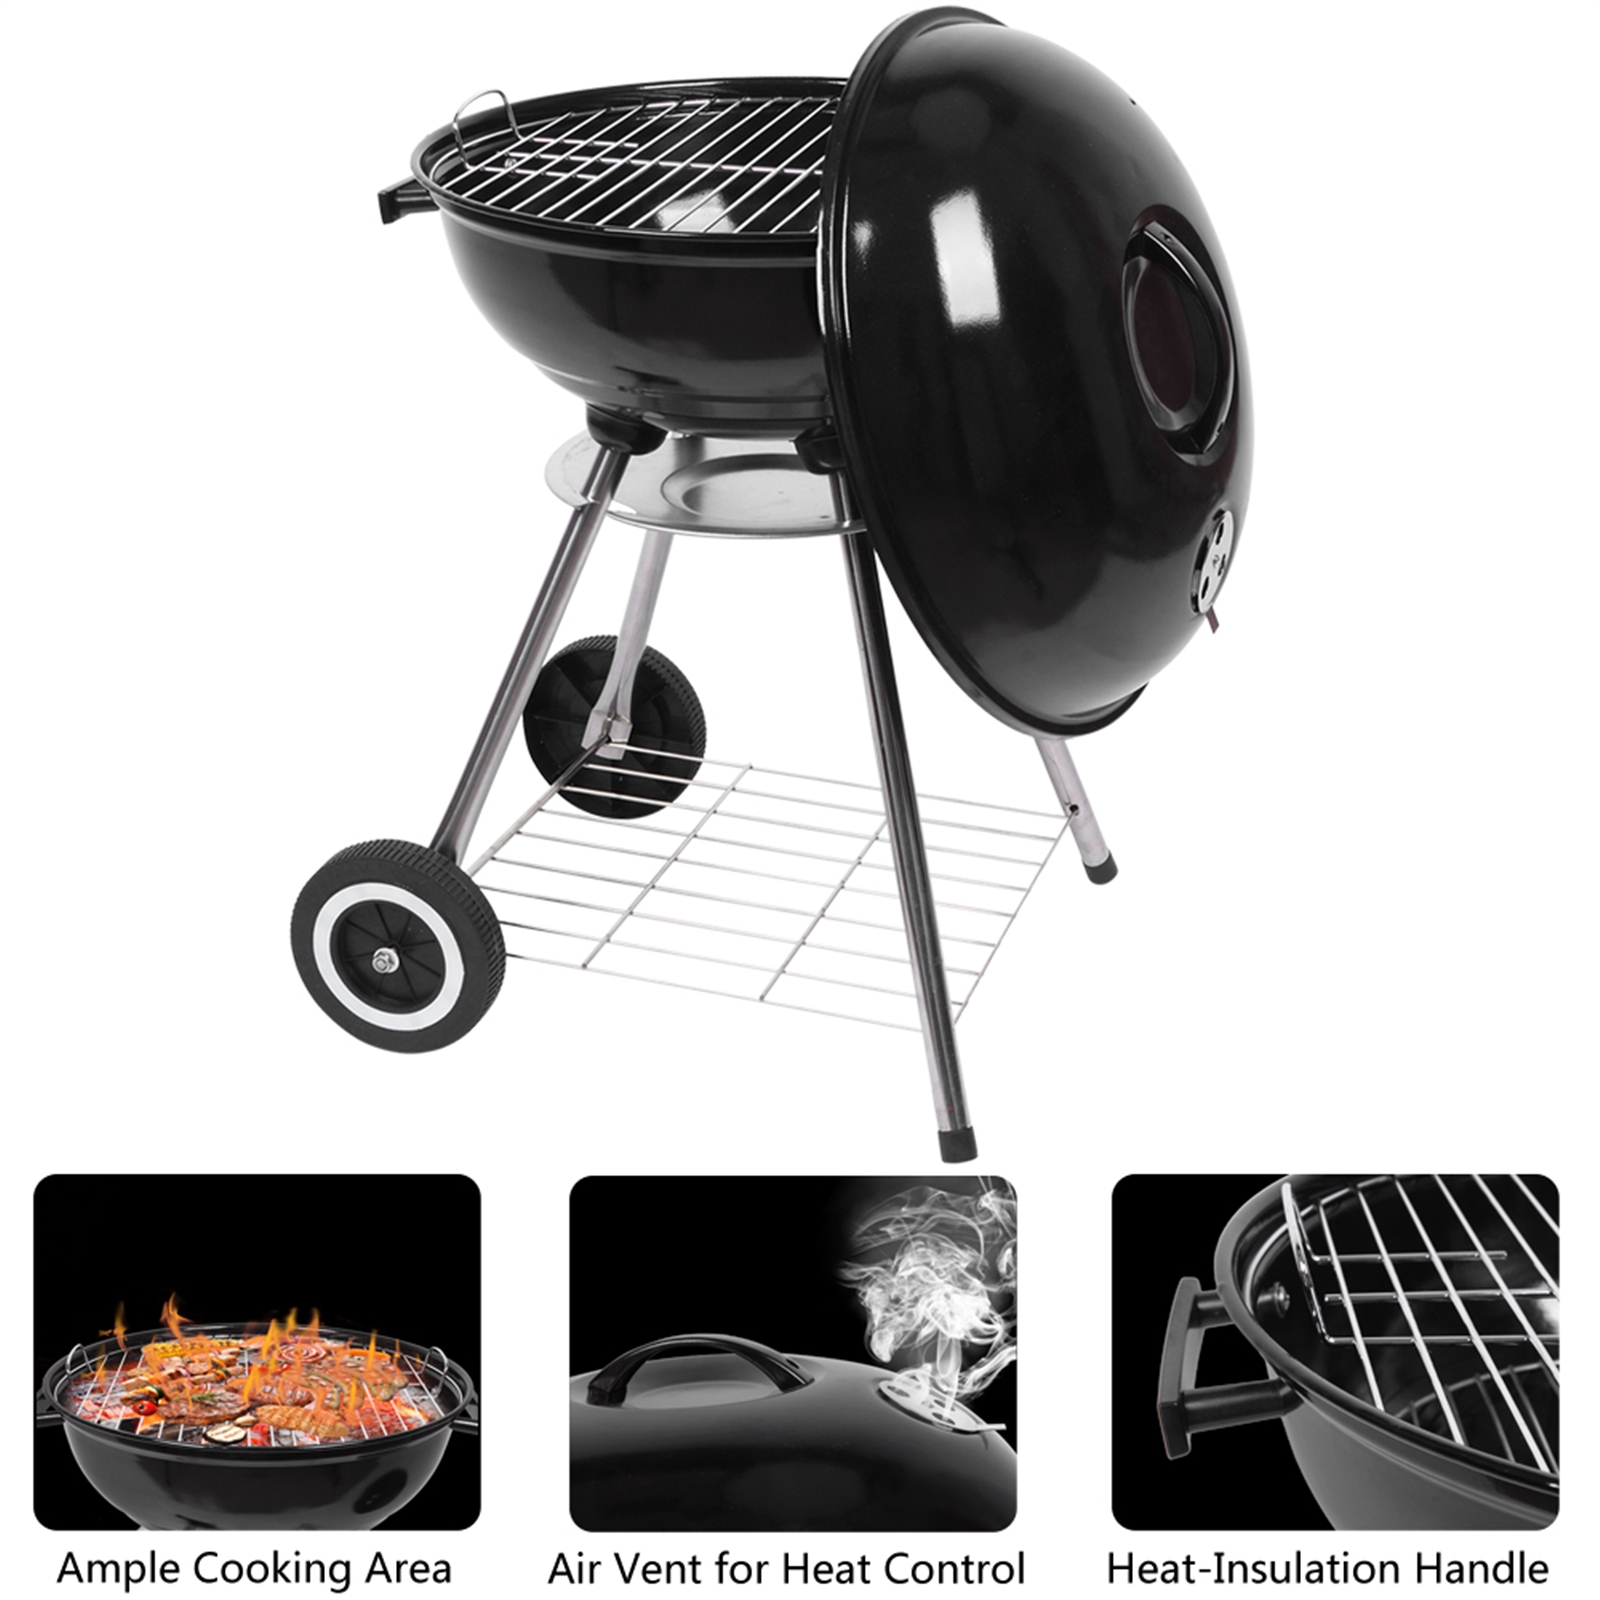 Goorabbit 18 Inch Charcoal Grill for Outdoor Camping, High Round Charcoal Barbecue Grill with Thickened Grilling Bowl for Picnic Small BBQ Kettle Patio with 2 Durable Wheels,Black - image 5 of 14